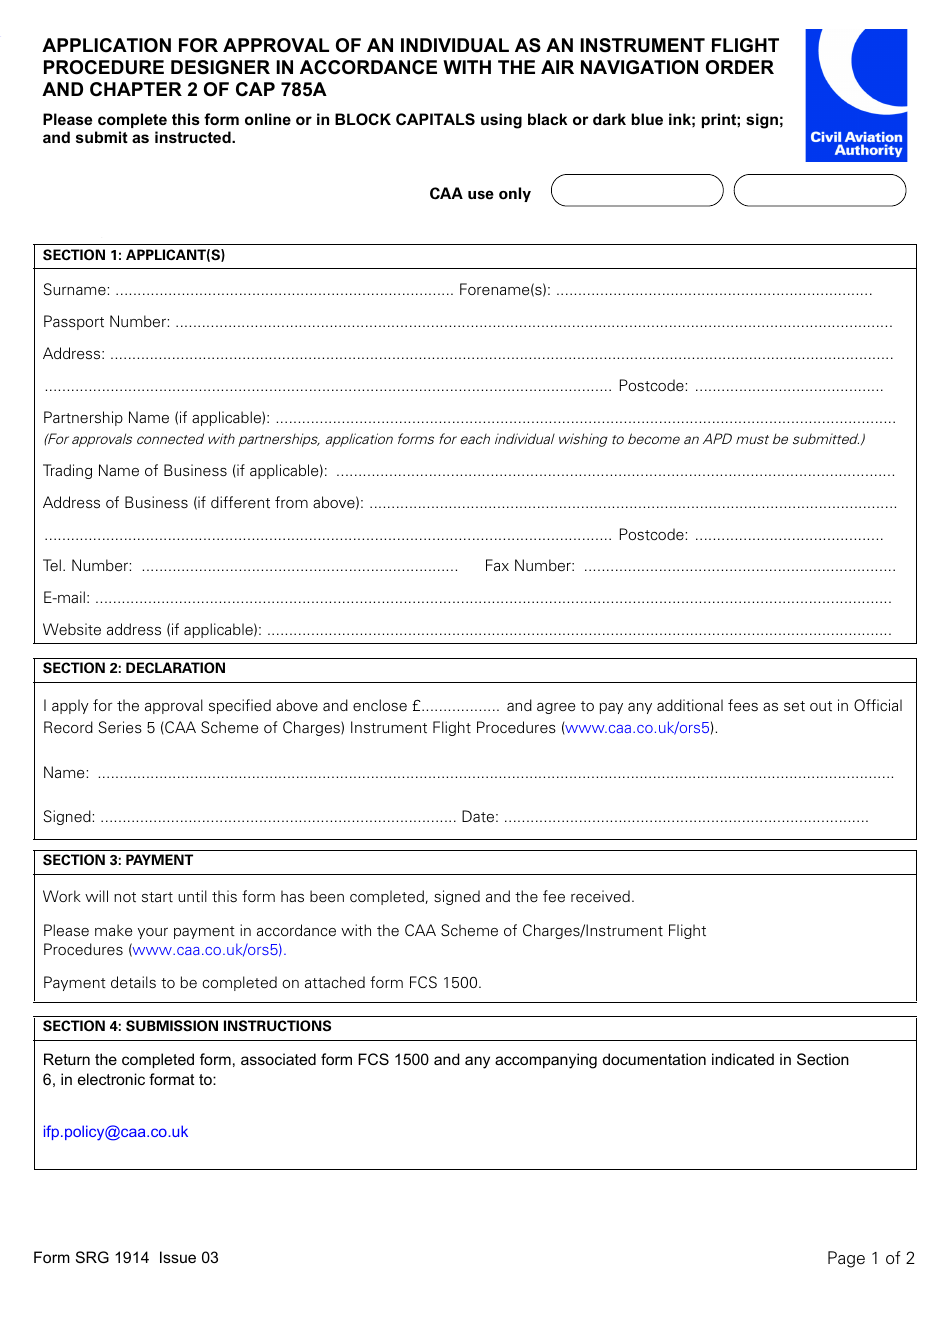 Form SRG1914 Application for Approval of an Individual as an Instrument Flight Procedure Designer in Accordance With the Air Navigation Order and Chapter 2 of CAP 785a - United Kingdom, Page 1